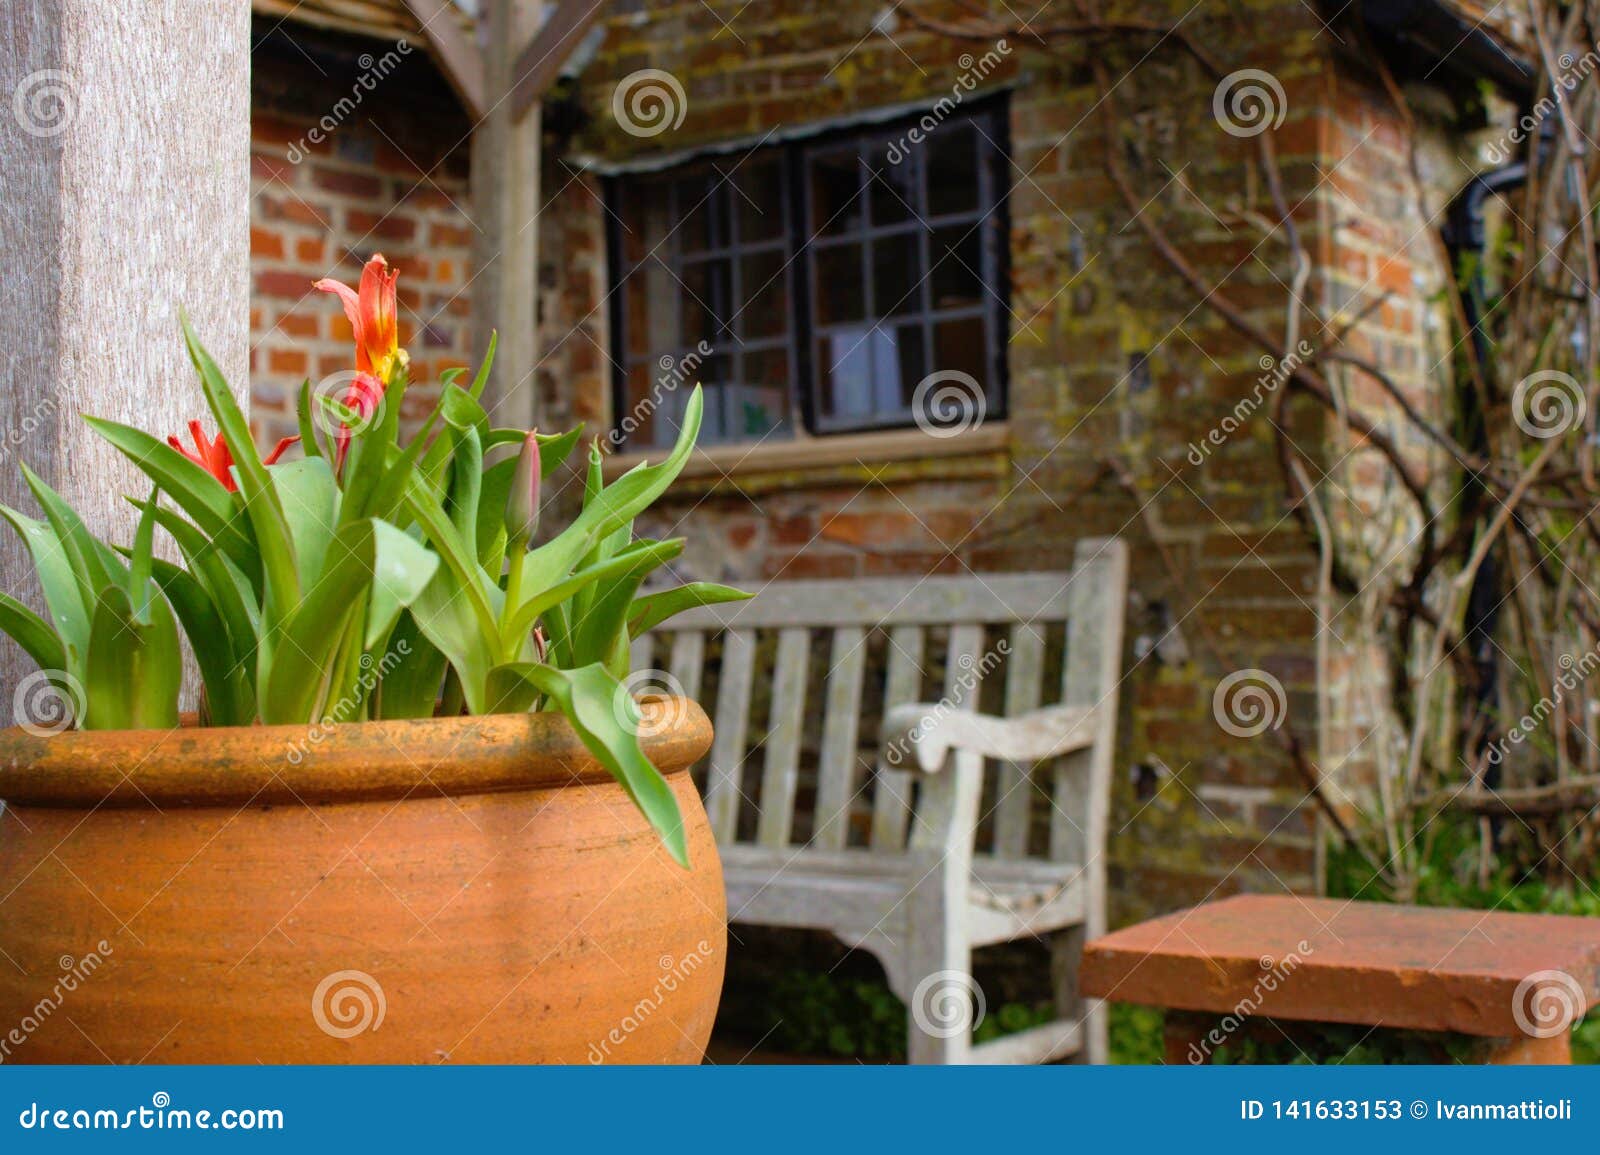 flower pot in front of a rural clergy house in england